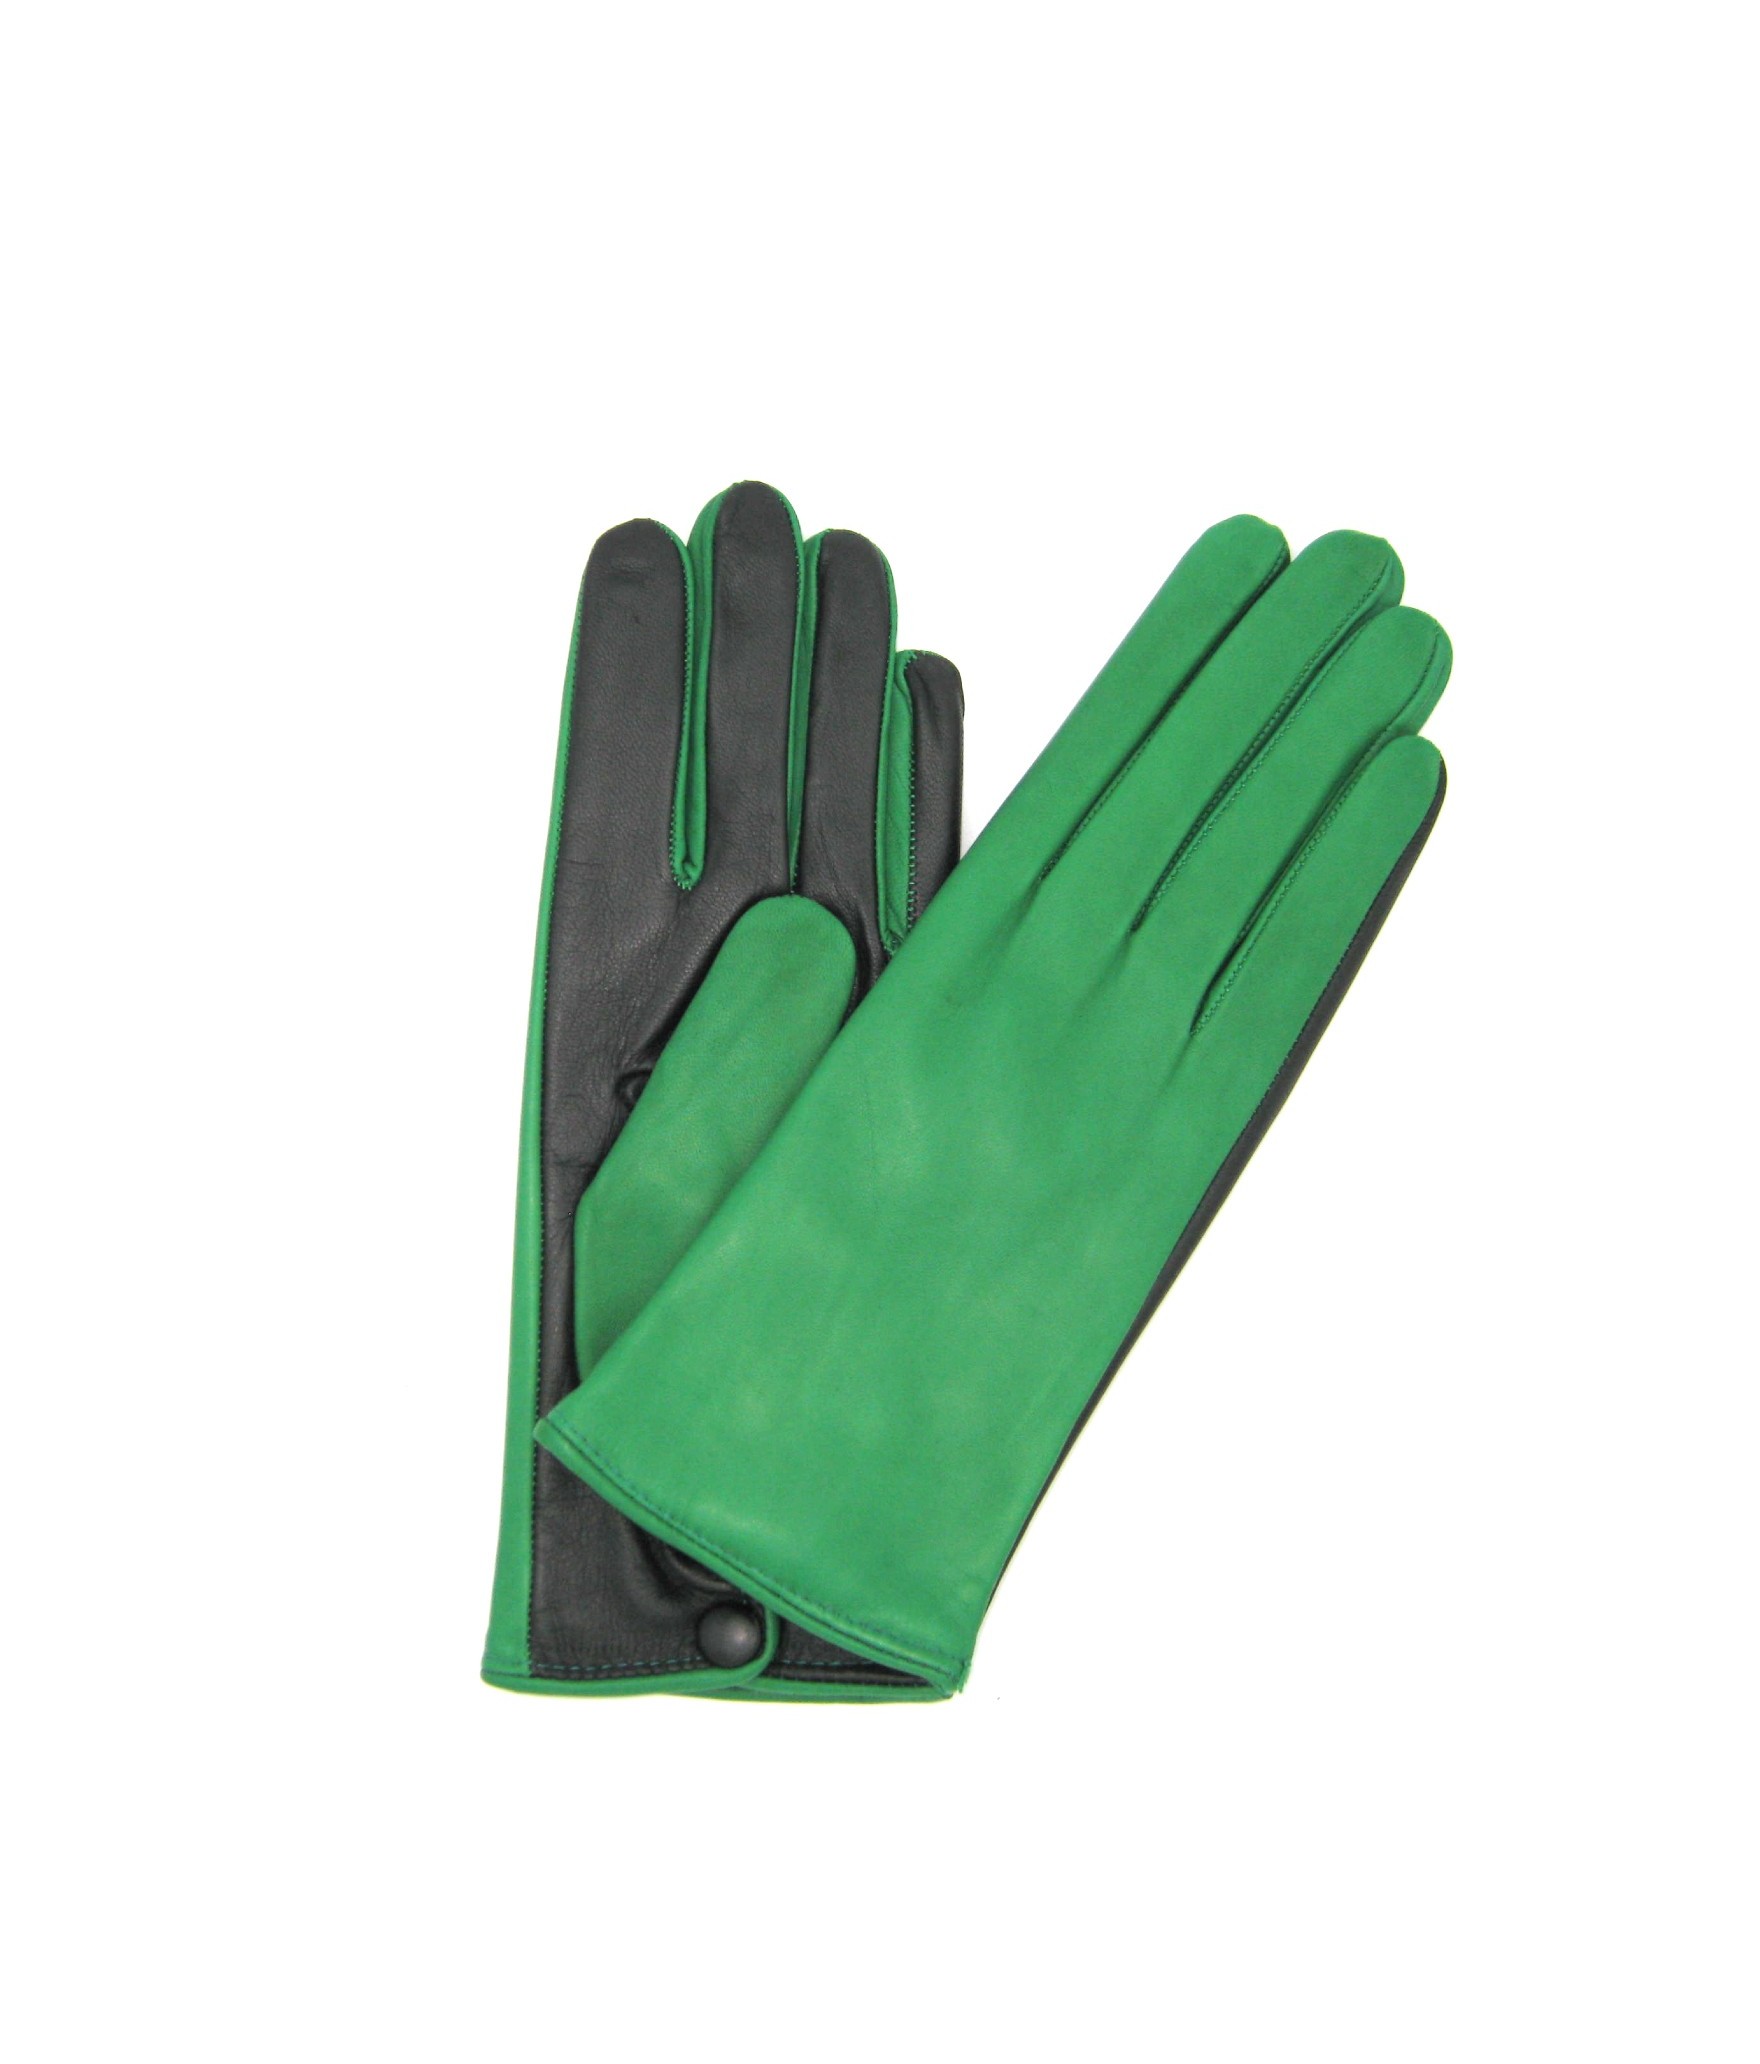 Touch Screen Nappa leather gloves with button, cashmere lined   Emerald Green/Black